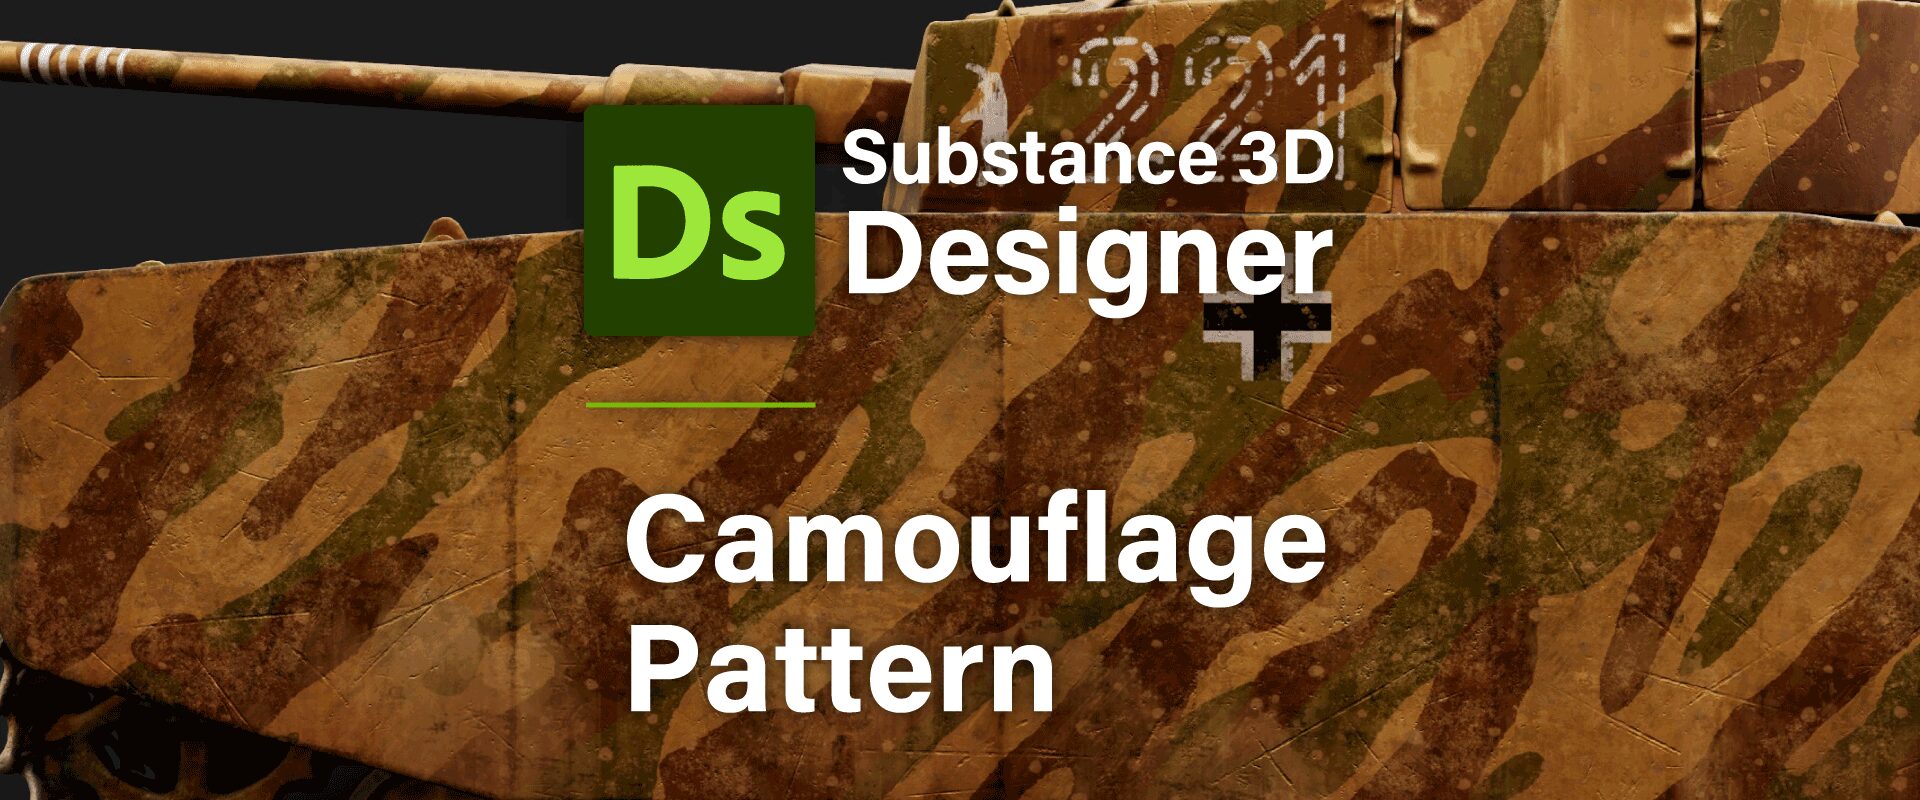 [ Introduction to Substance 3D Designer ] Basic steps to output to Substance 3D Painter